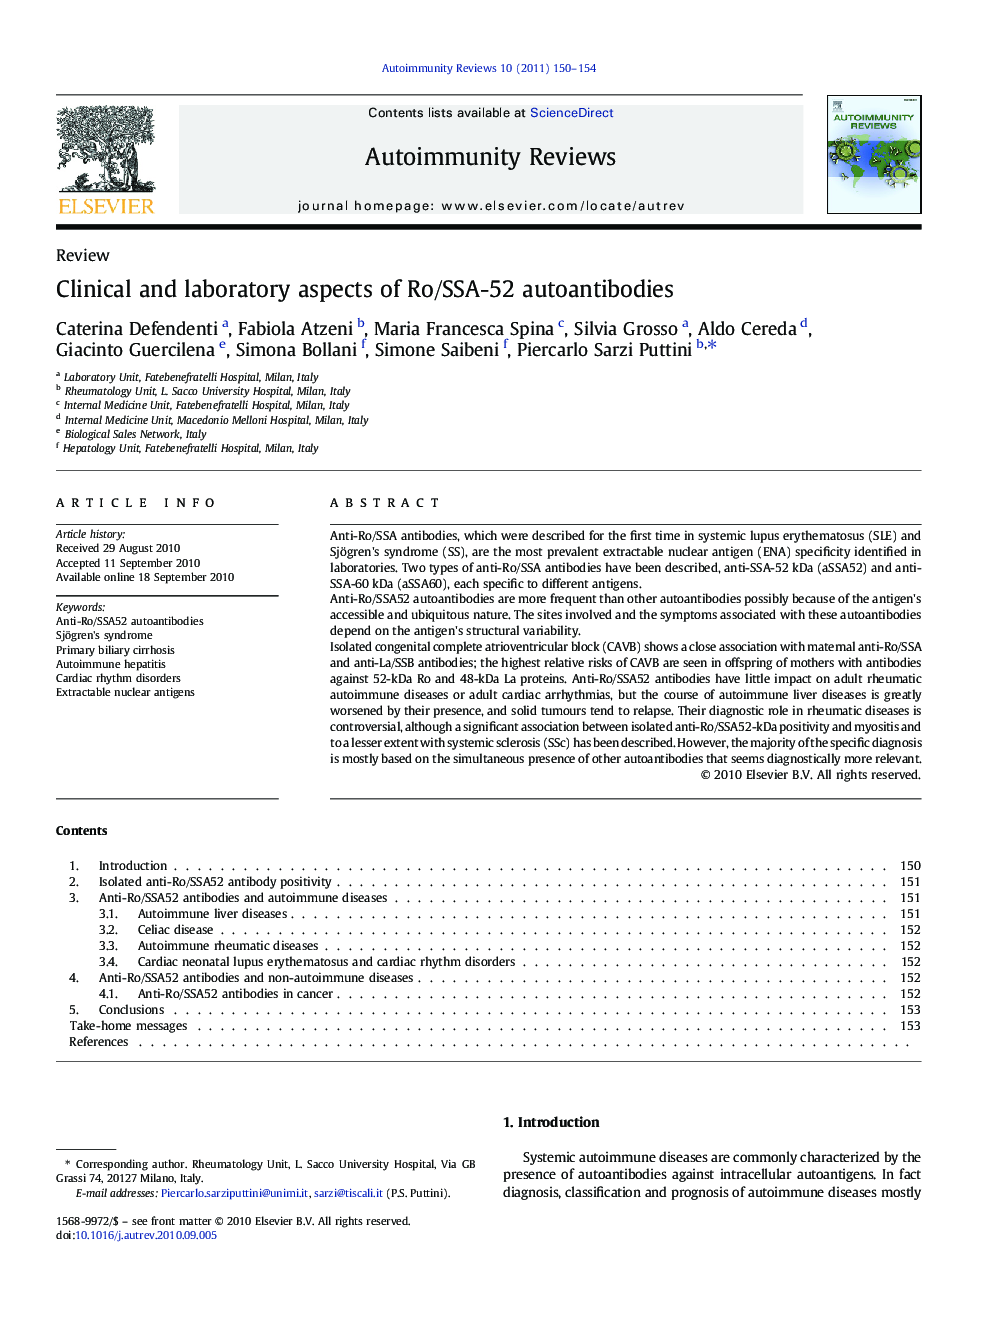 Clinical and laboratory aspects of Ro/SSA-52 autoantibodies